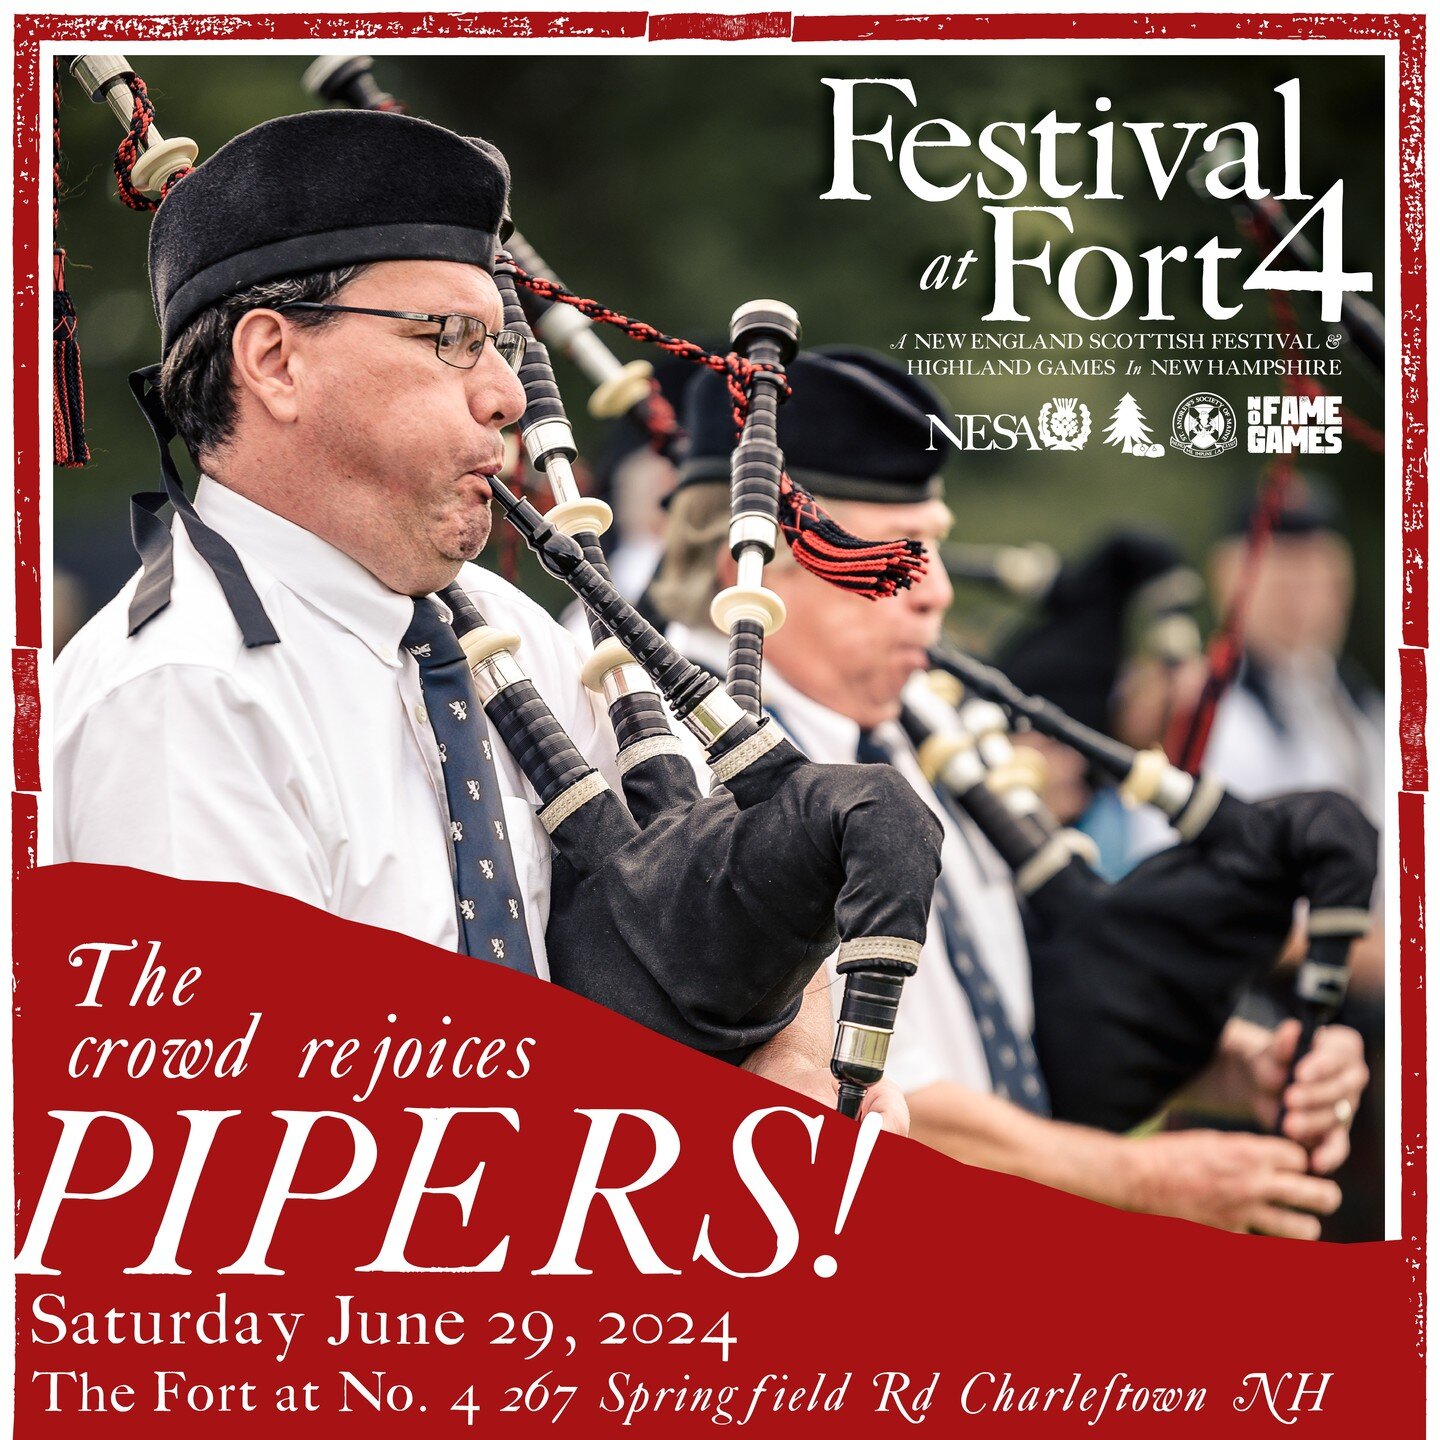 The Crowd rejoices at the sounds of the Pipers!
Come see the best Pipes &amp; Drums in New England at The Festival At Fort 4! 
Saturday June 29,2024.
Get your tickets today!
#highlandgames #festivalatfort4 #stonelifting #pipesanddrums #highalndfestiv